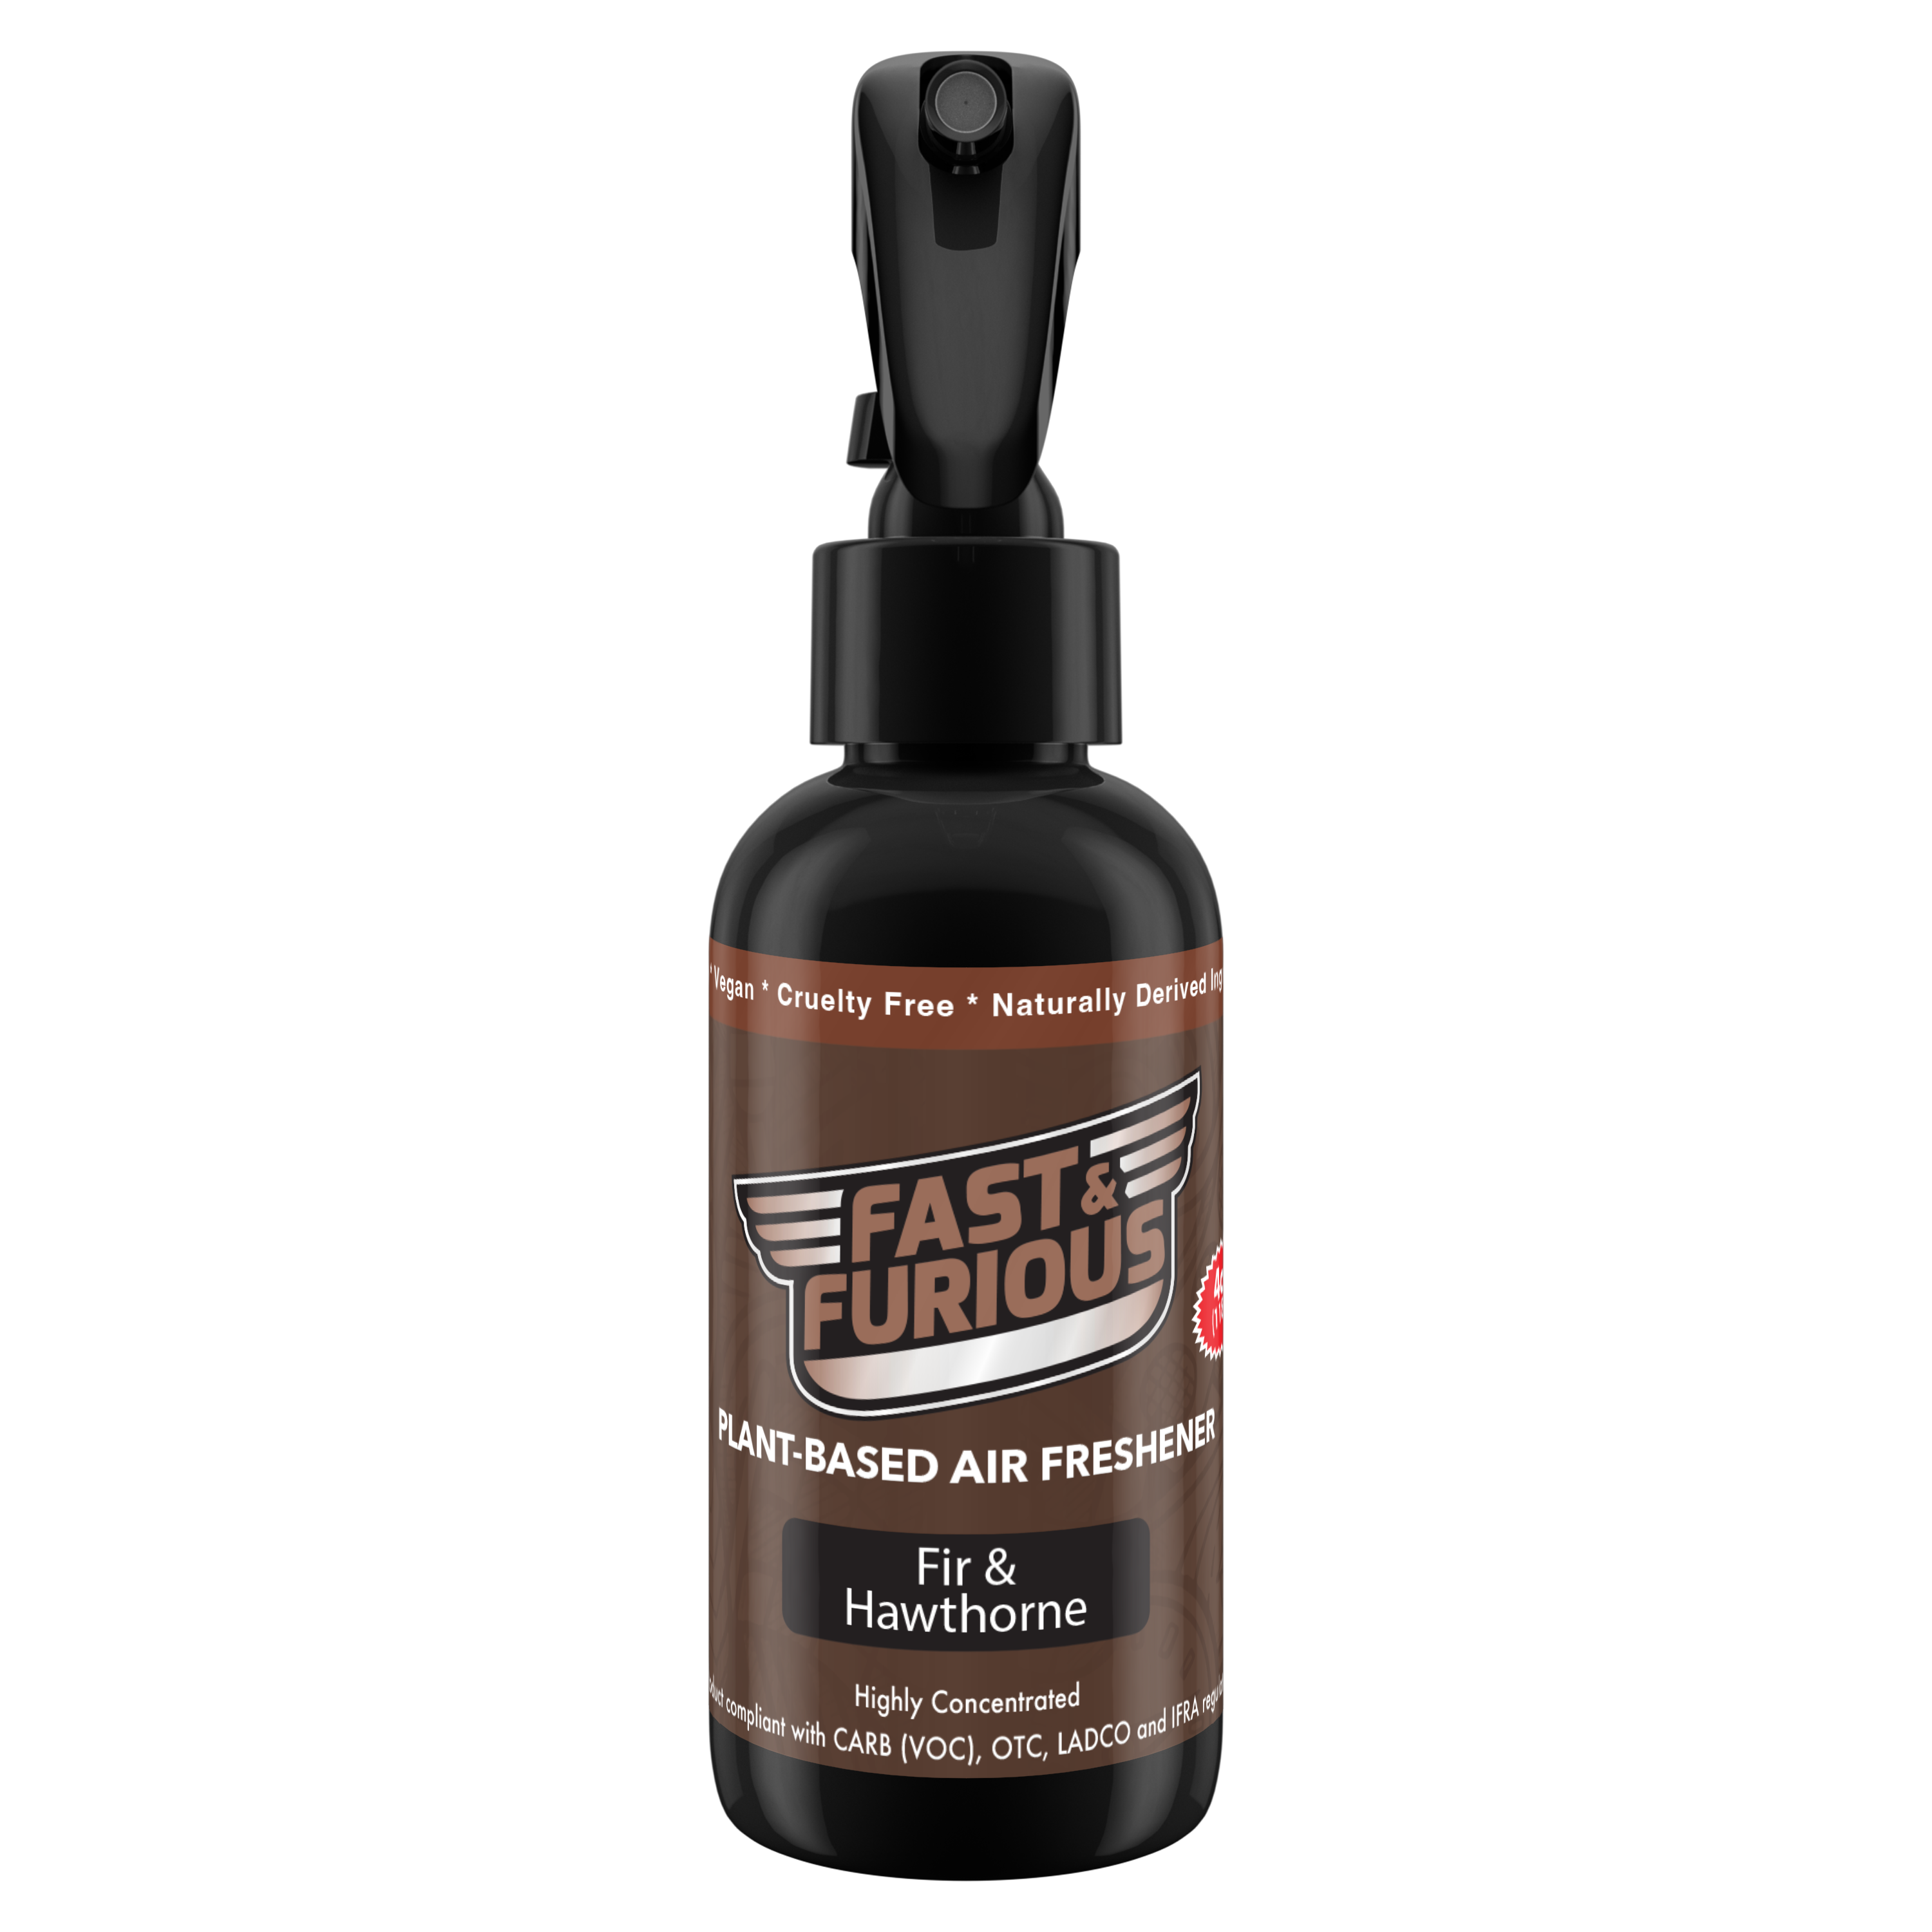 Fast and Furious Plant-Based Air Freshener - Fir & Hawthorne Scent